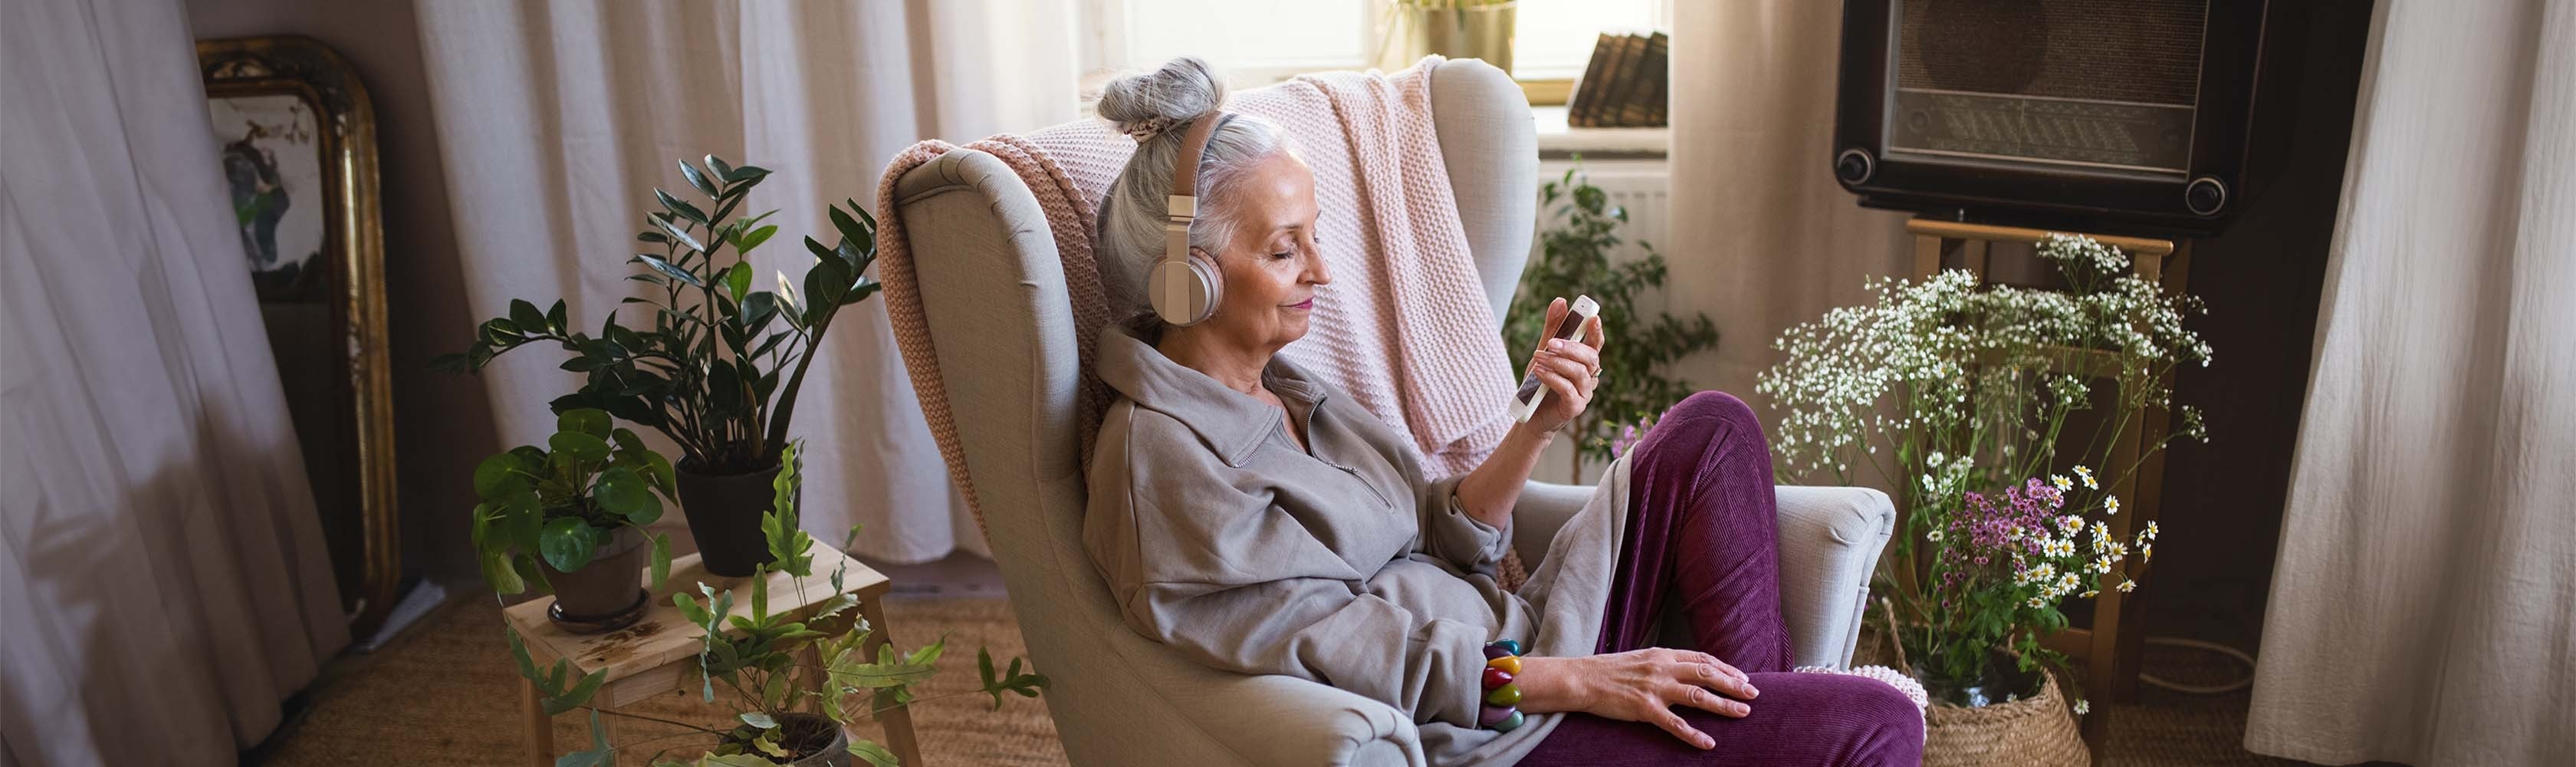 An elderly woman sits in an armchair in her living room and listens to a podcast on health topics